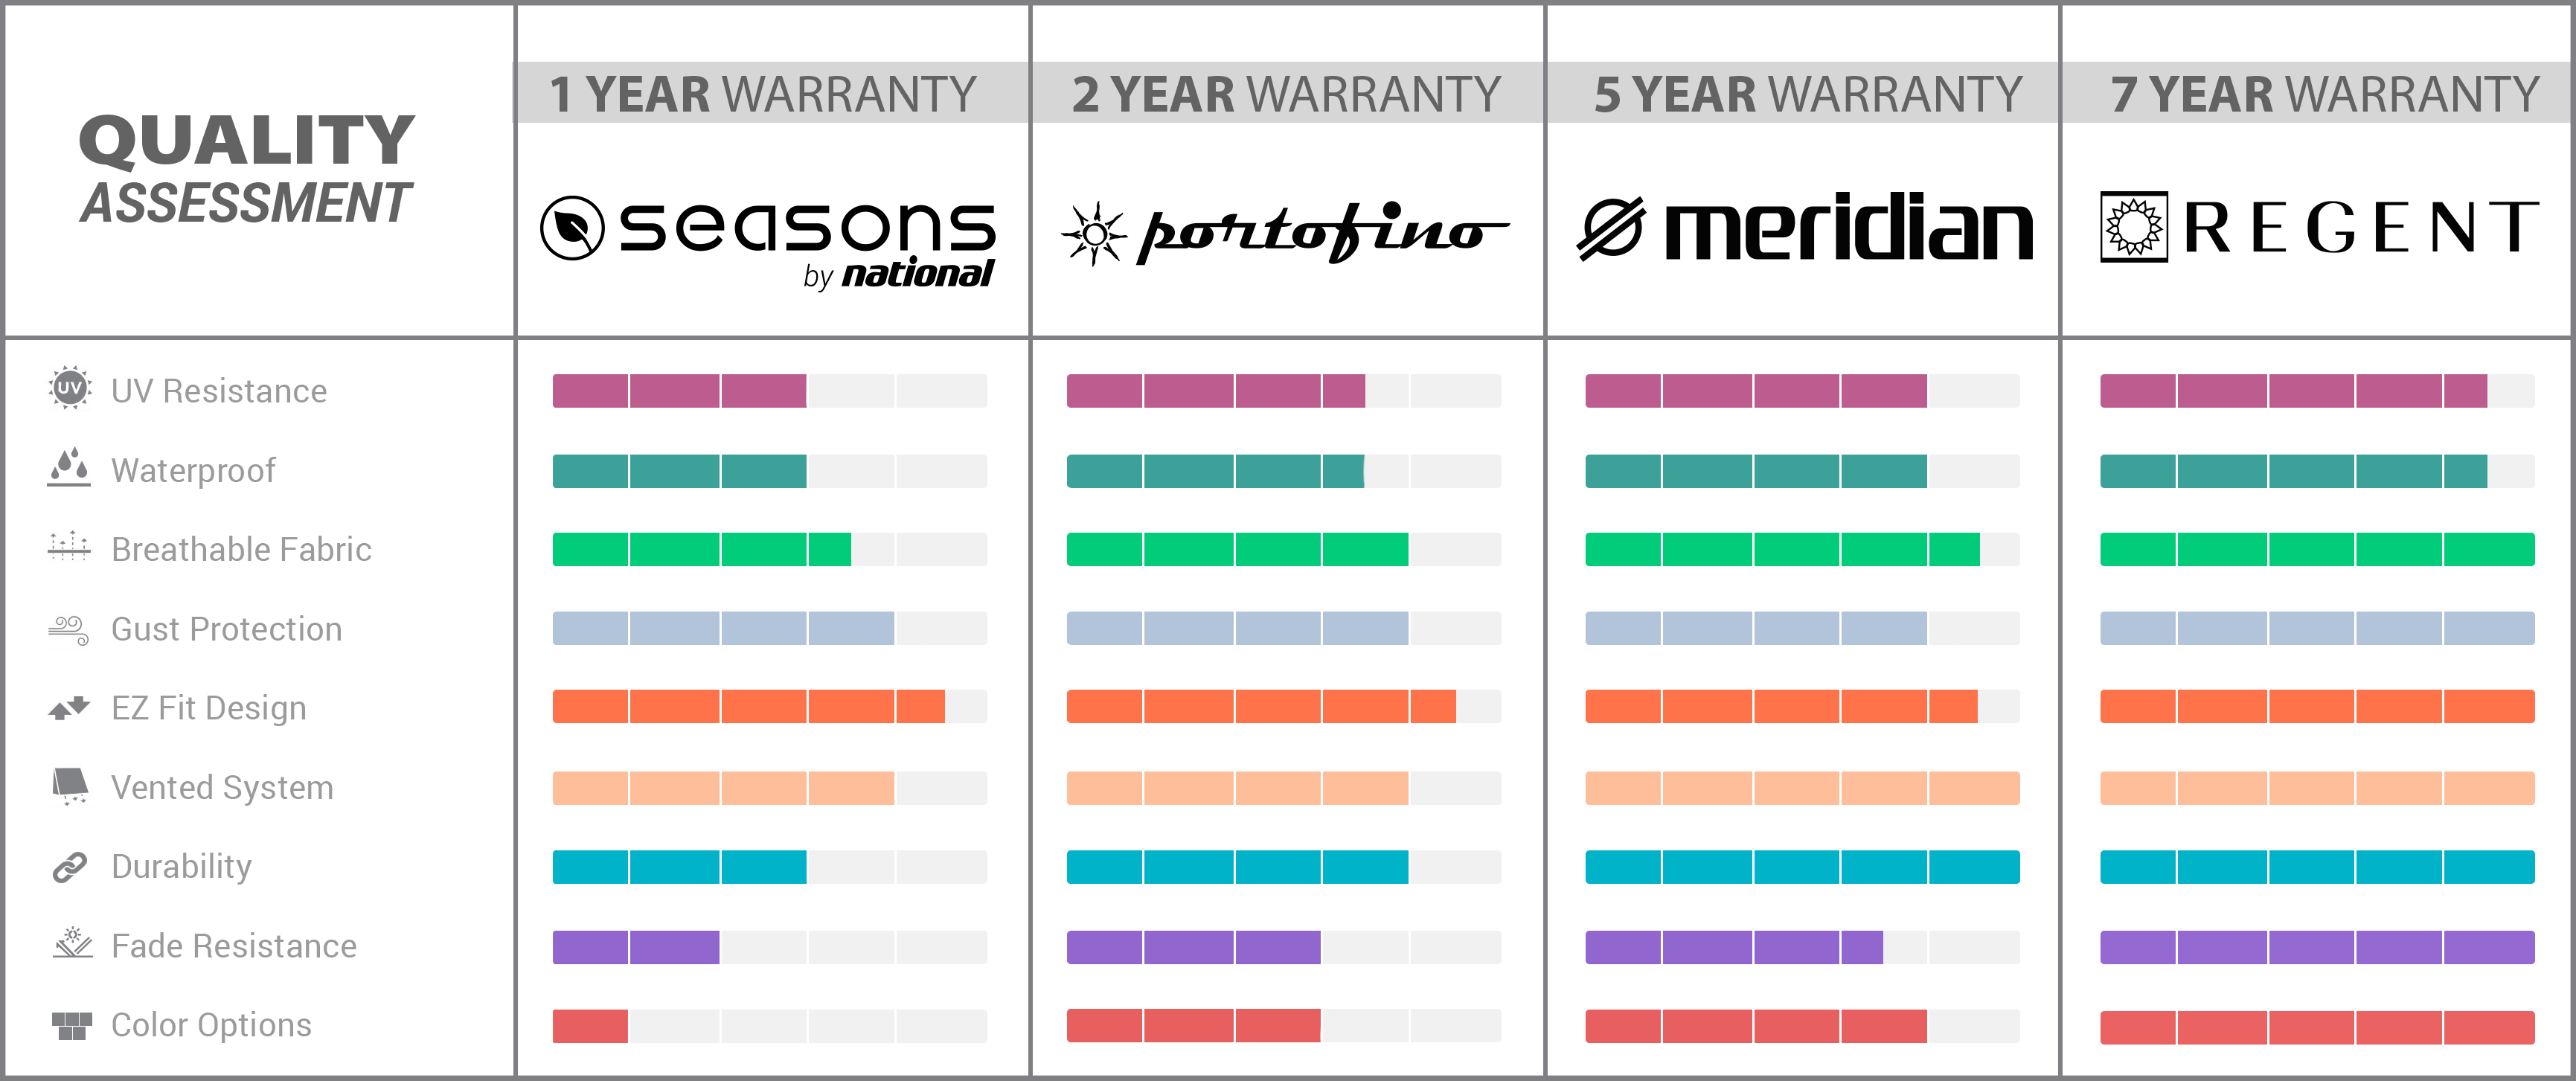 NPC-Outdoor-Furniture-Covers-Quality-Comparison-Chart_2